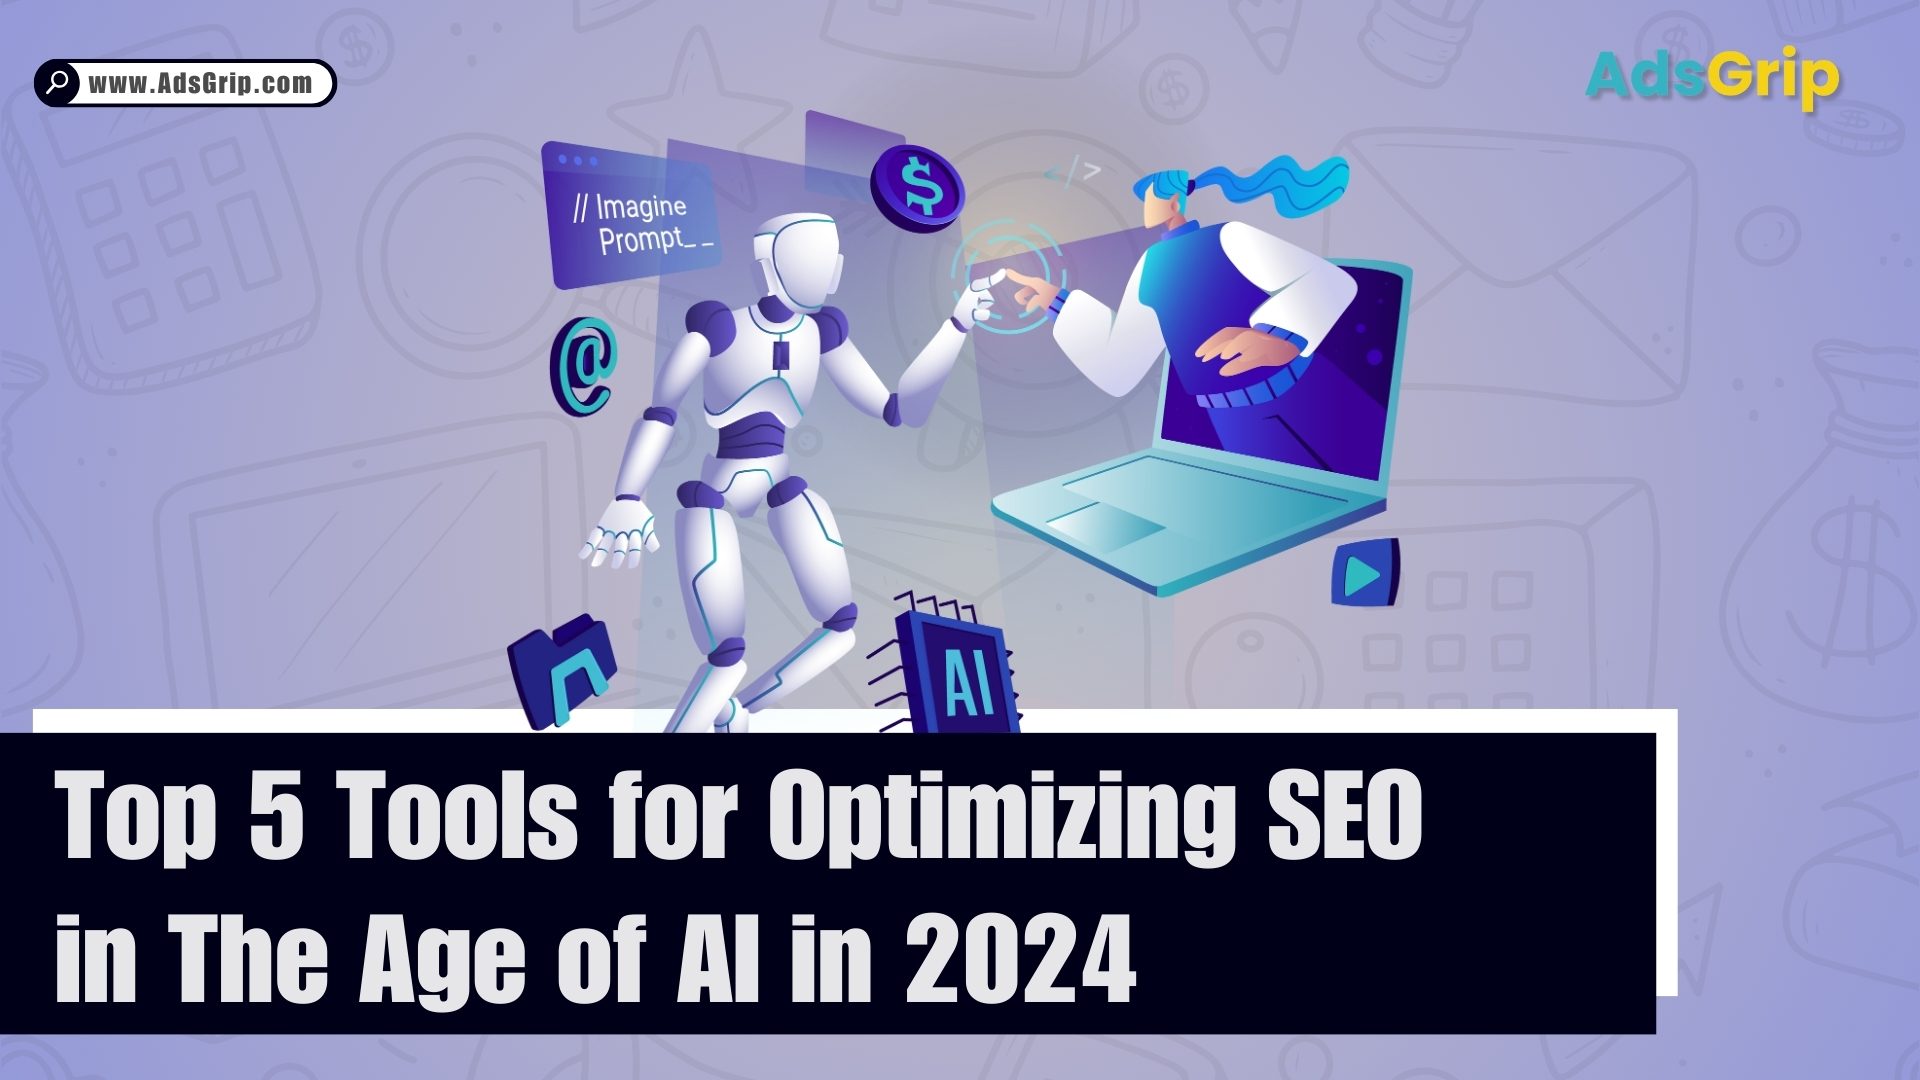 Top 5 Tools for Optimizing SEO in The Age of AI in 2024